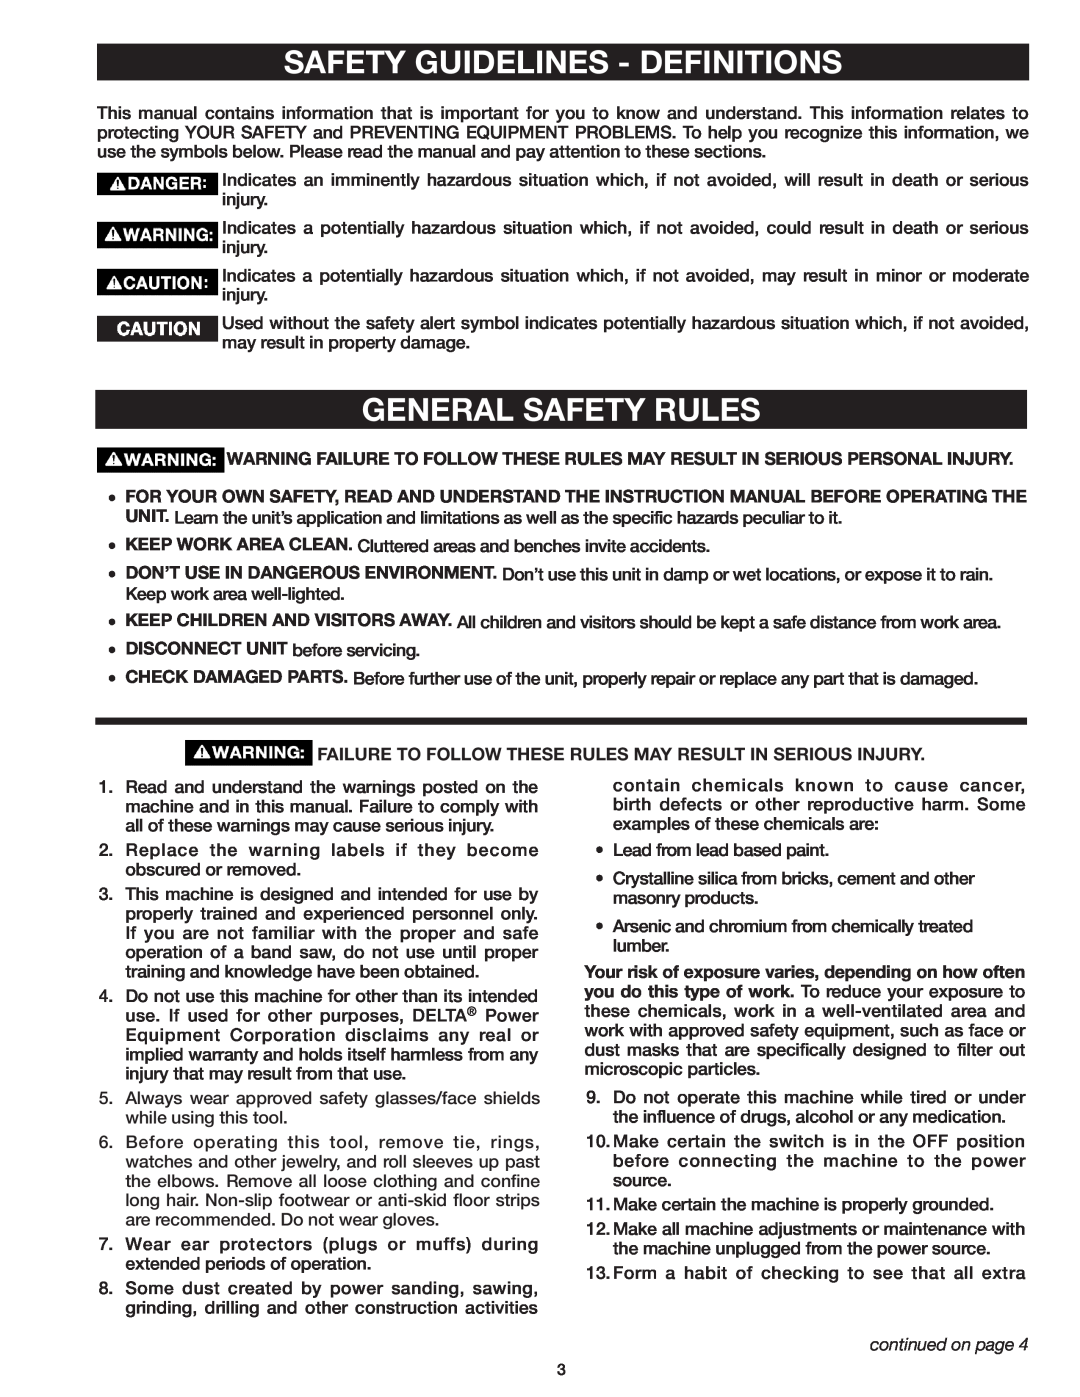 Delta 37-071 instruction manual Safety Guidelines - Definitions, General Safety Rules, continued on page 